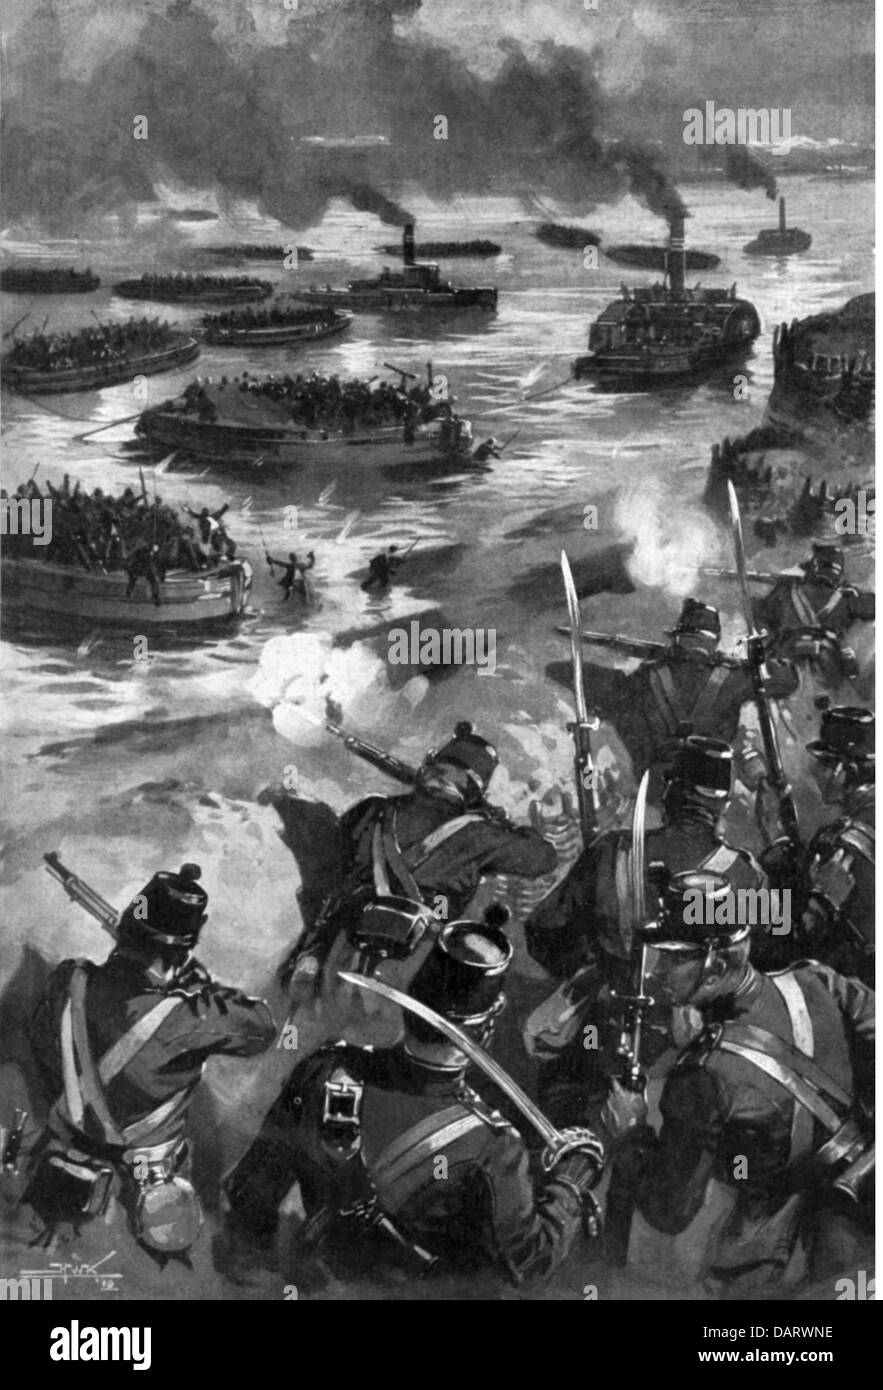 Fenian Raids 1866 - 1871, crossing of the Niagara, 1866, print after drawing, 1910, Upper Canada, Ontario, Canadian militia, soldiers, soldier, Great Britain, British Empire, Ireland, Irish struggle for freedom, Fenian Brotherhood, skirmish, skirmish, disembarkment, 19th century, historic, historical, 1910s, 20th century, people, Additional-Rights-Clearences-Not Available Stock Photo